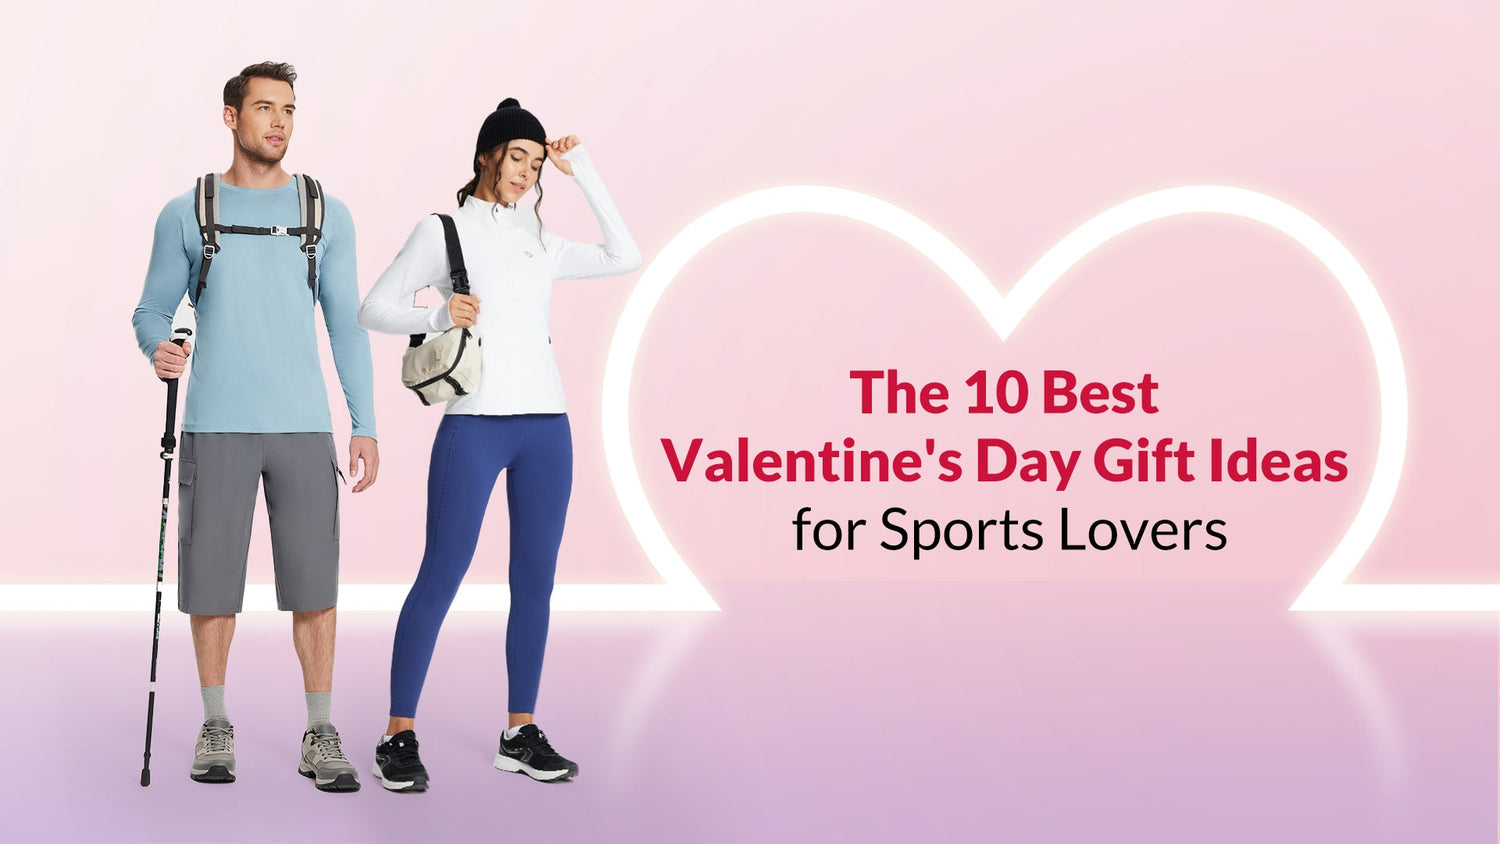 The 10 Best Valentine's Day Gift Ideas for Sports Lovers